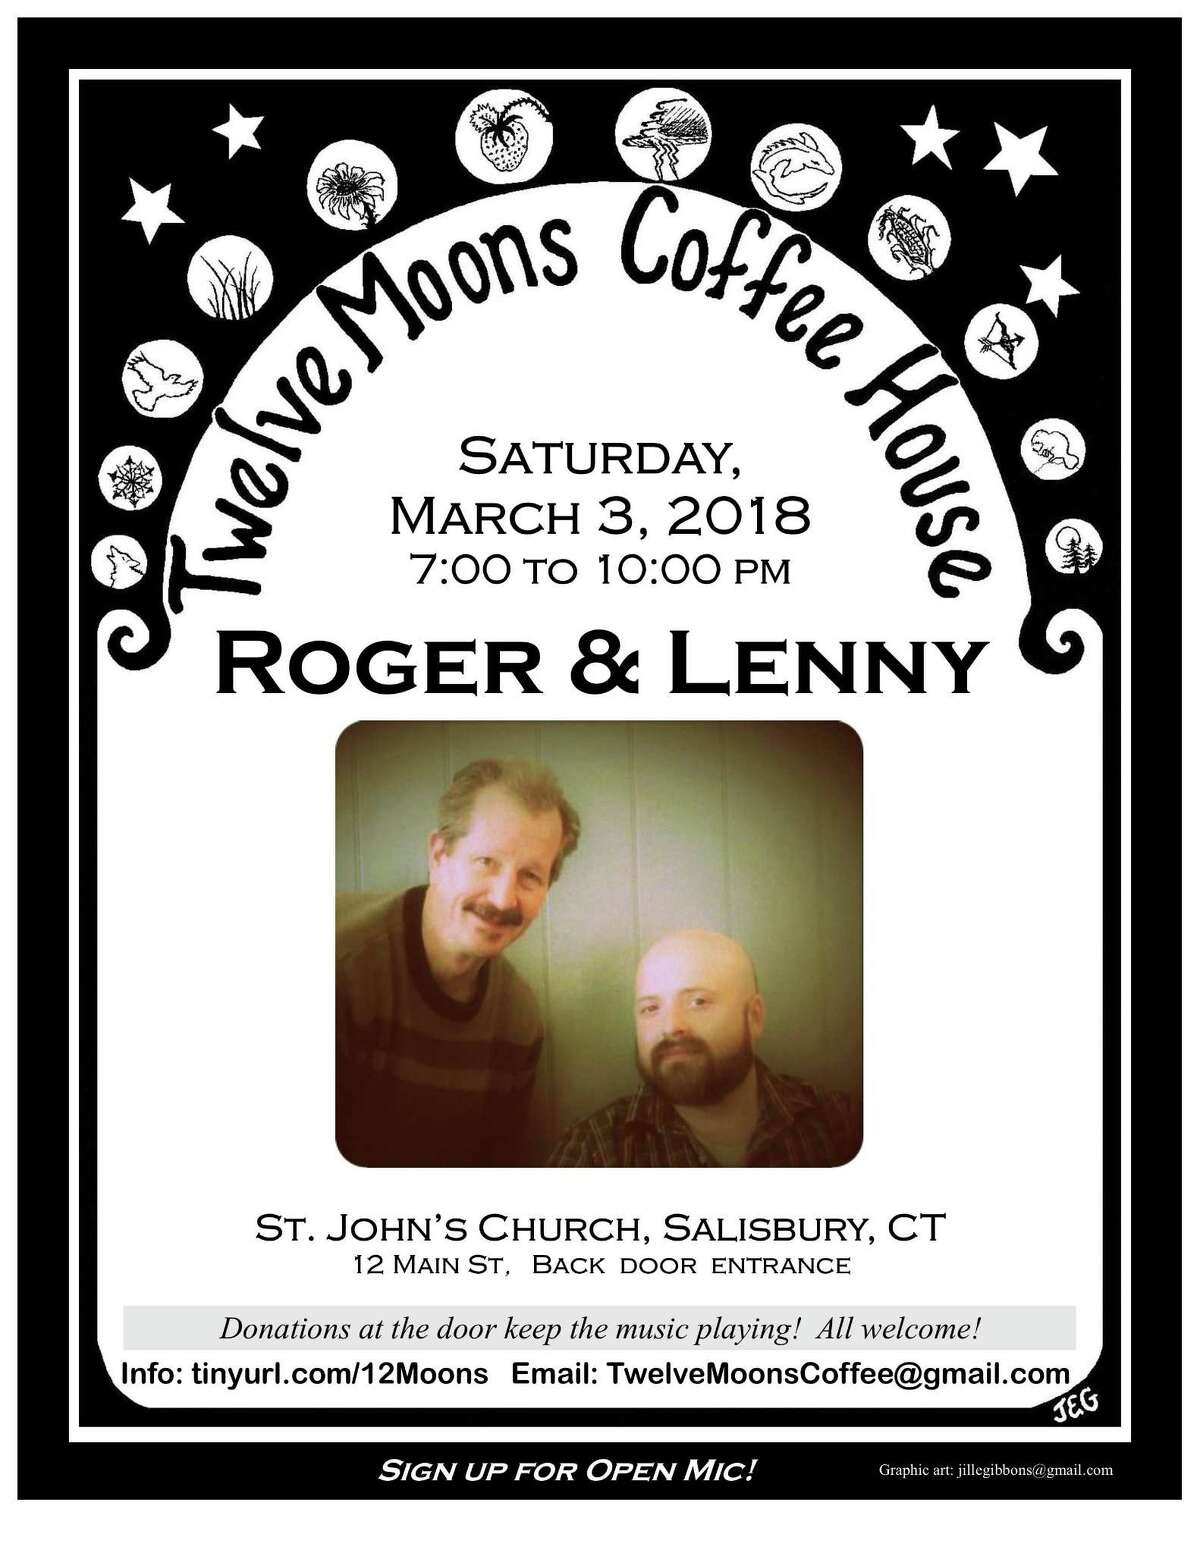 Twelve Moons Coffee House in Salisbury will host a concert by Roger & Lenny on Saturday, March 3.